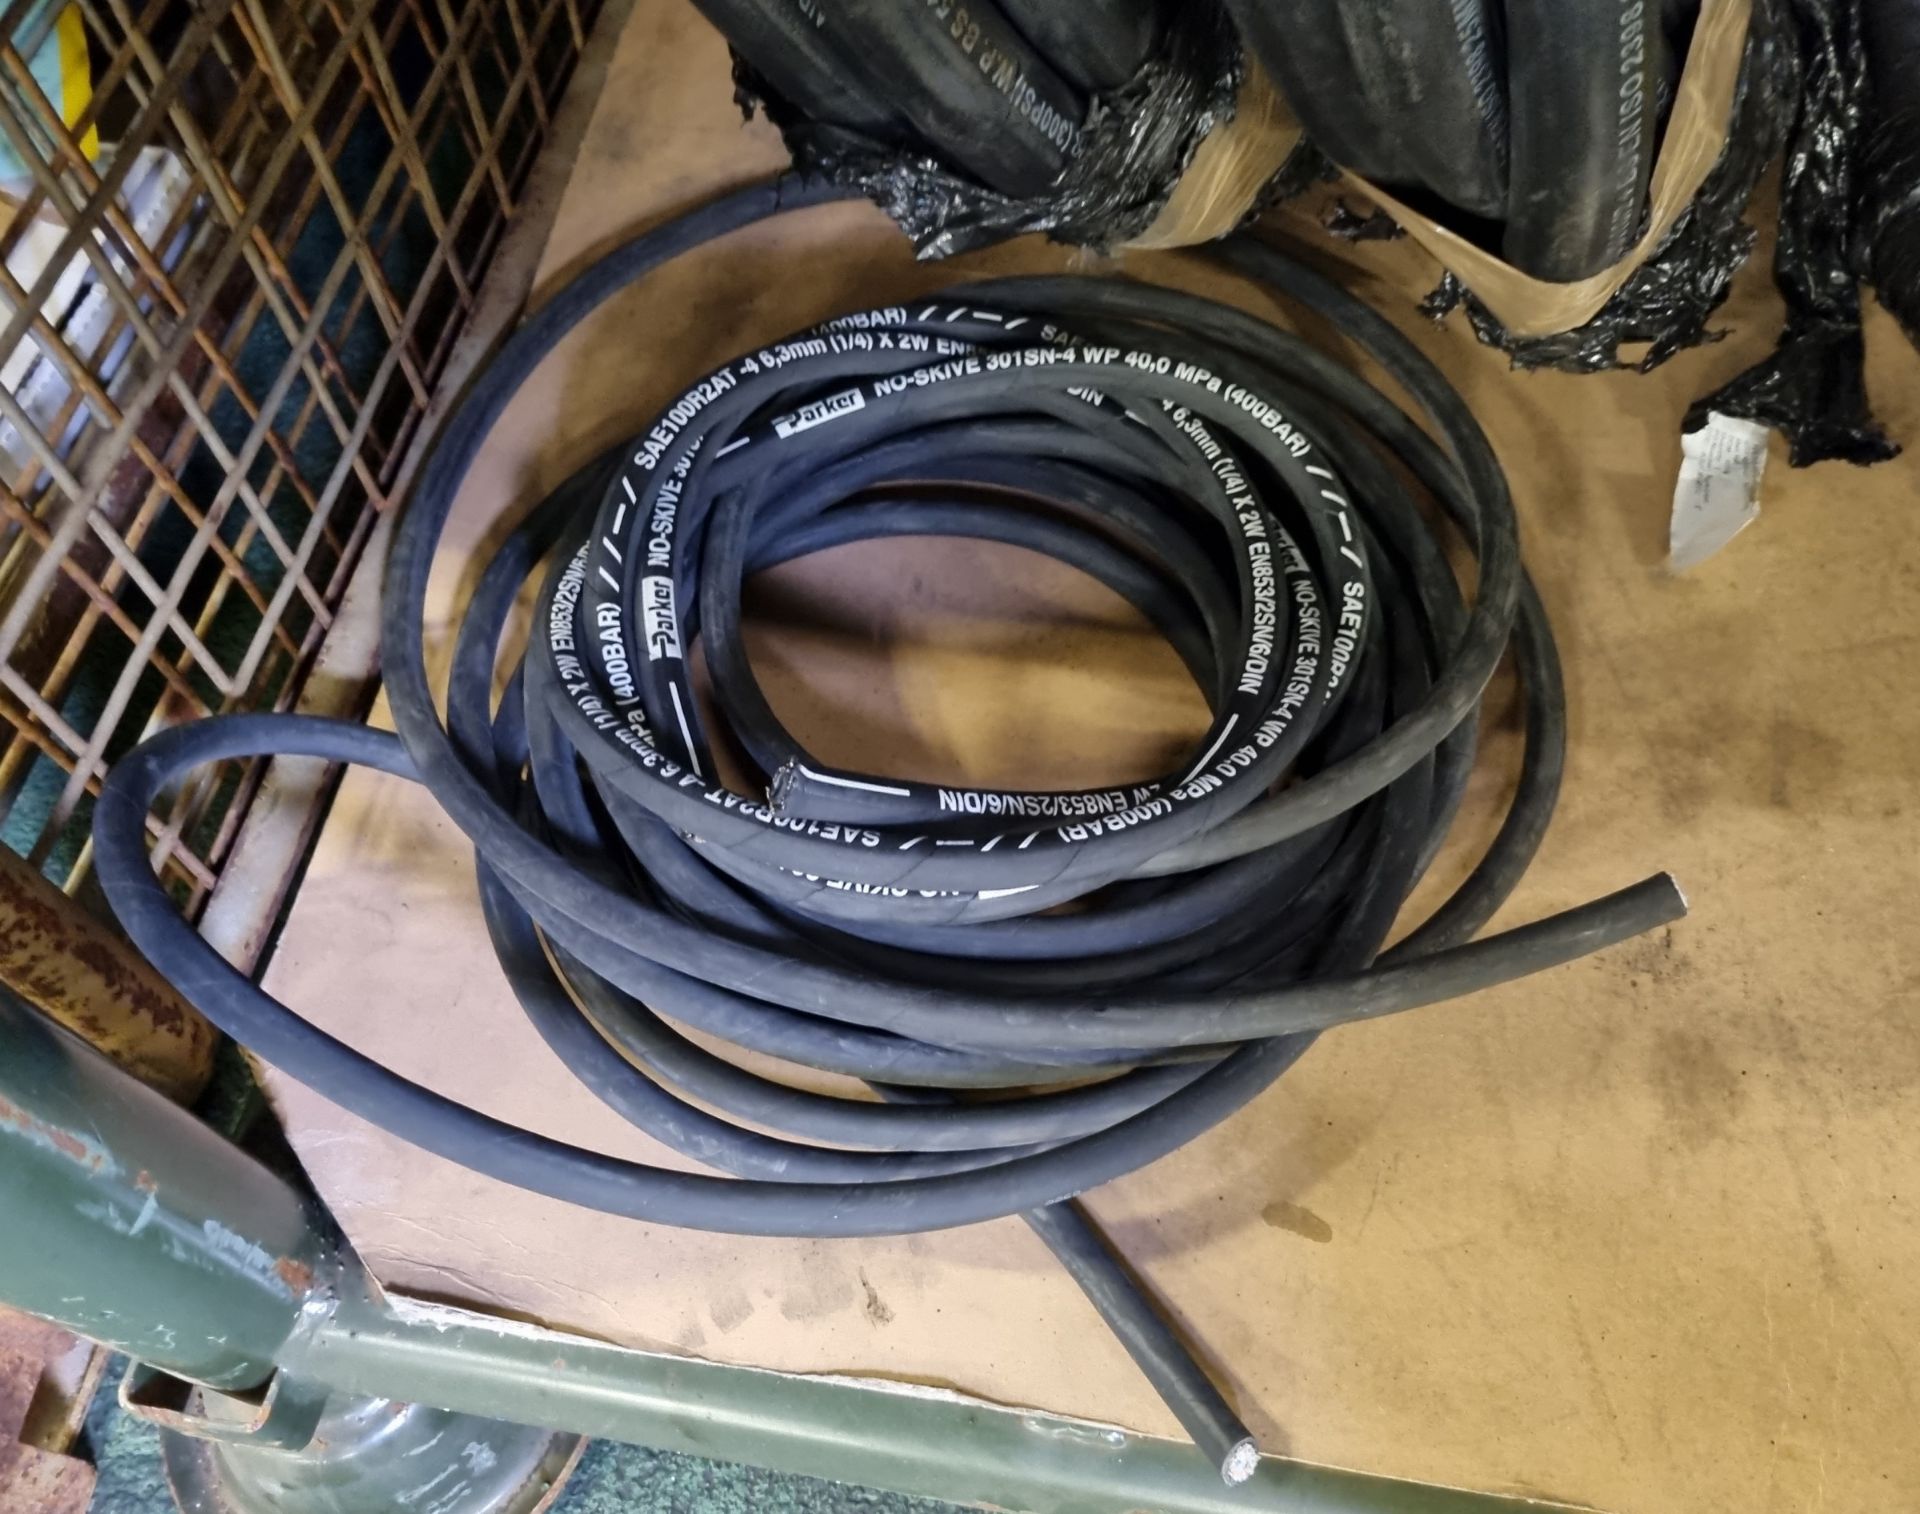 Workshop consumables - 25mm ID air hose, plastic tubing, multicore cable and rubber hose - Image 5 of 5